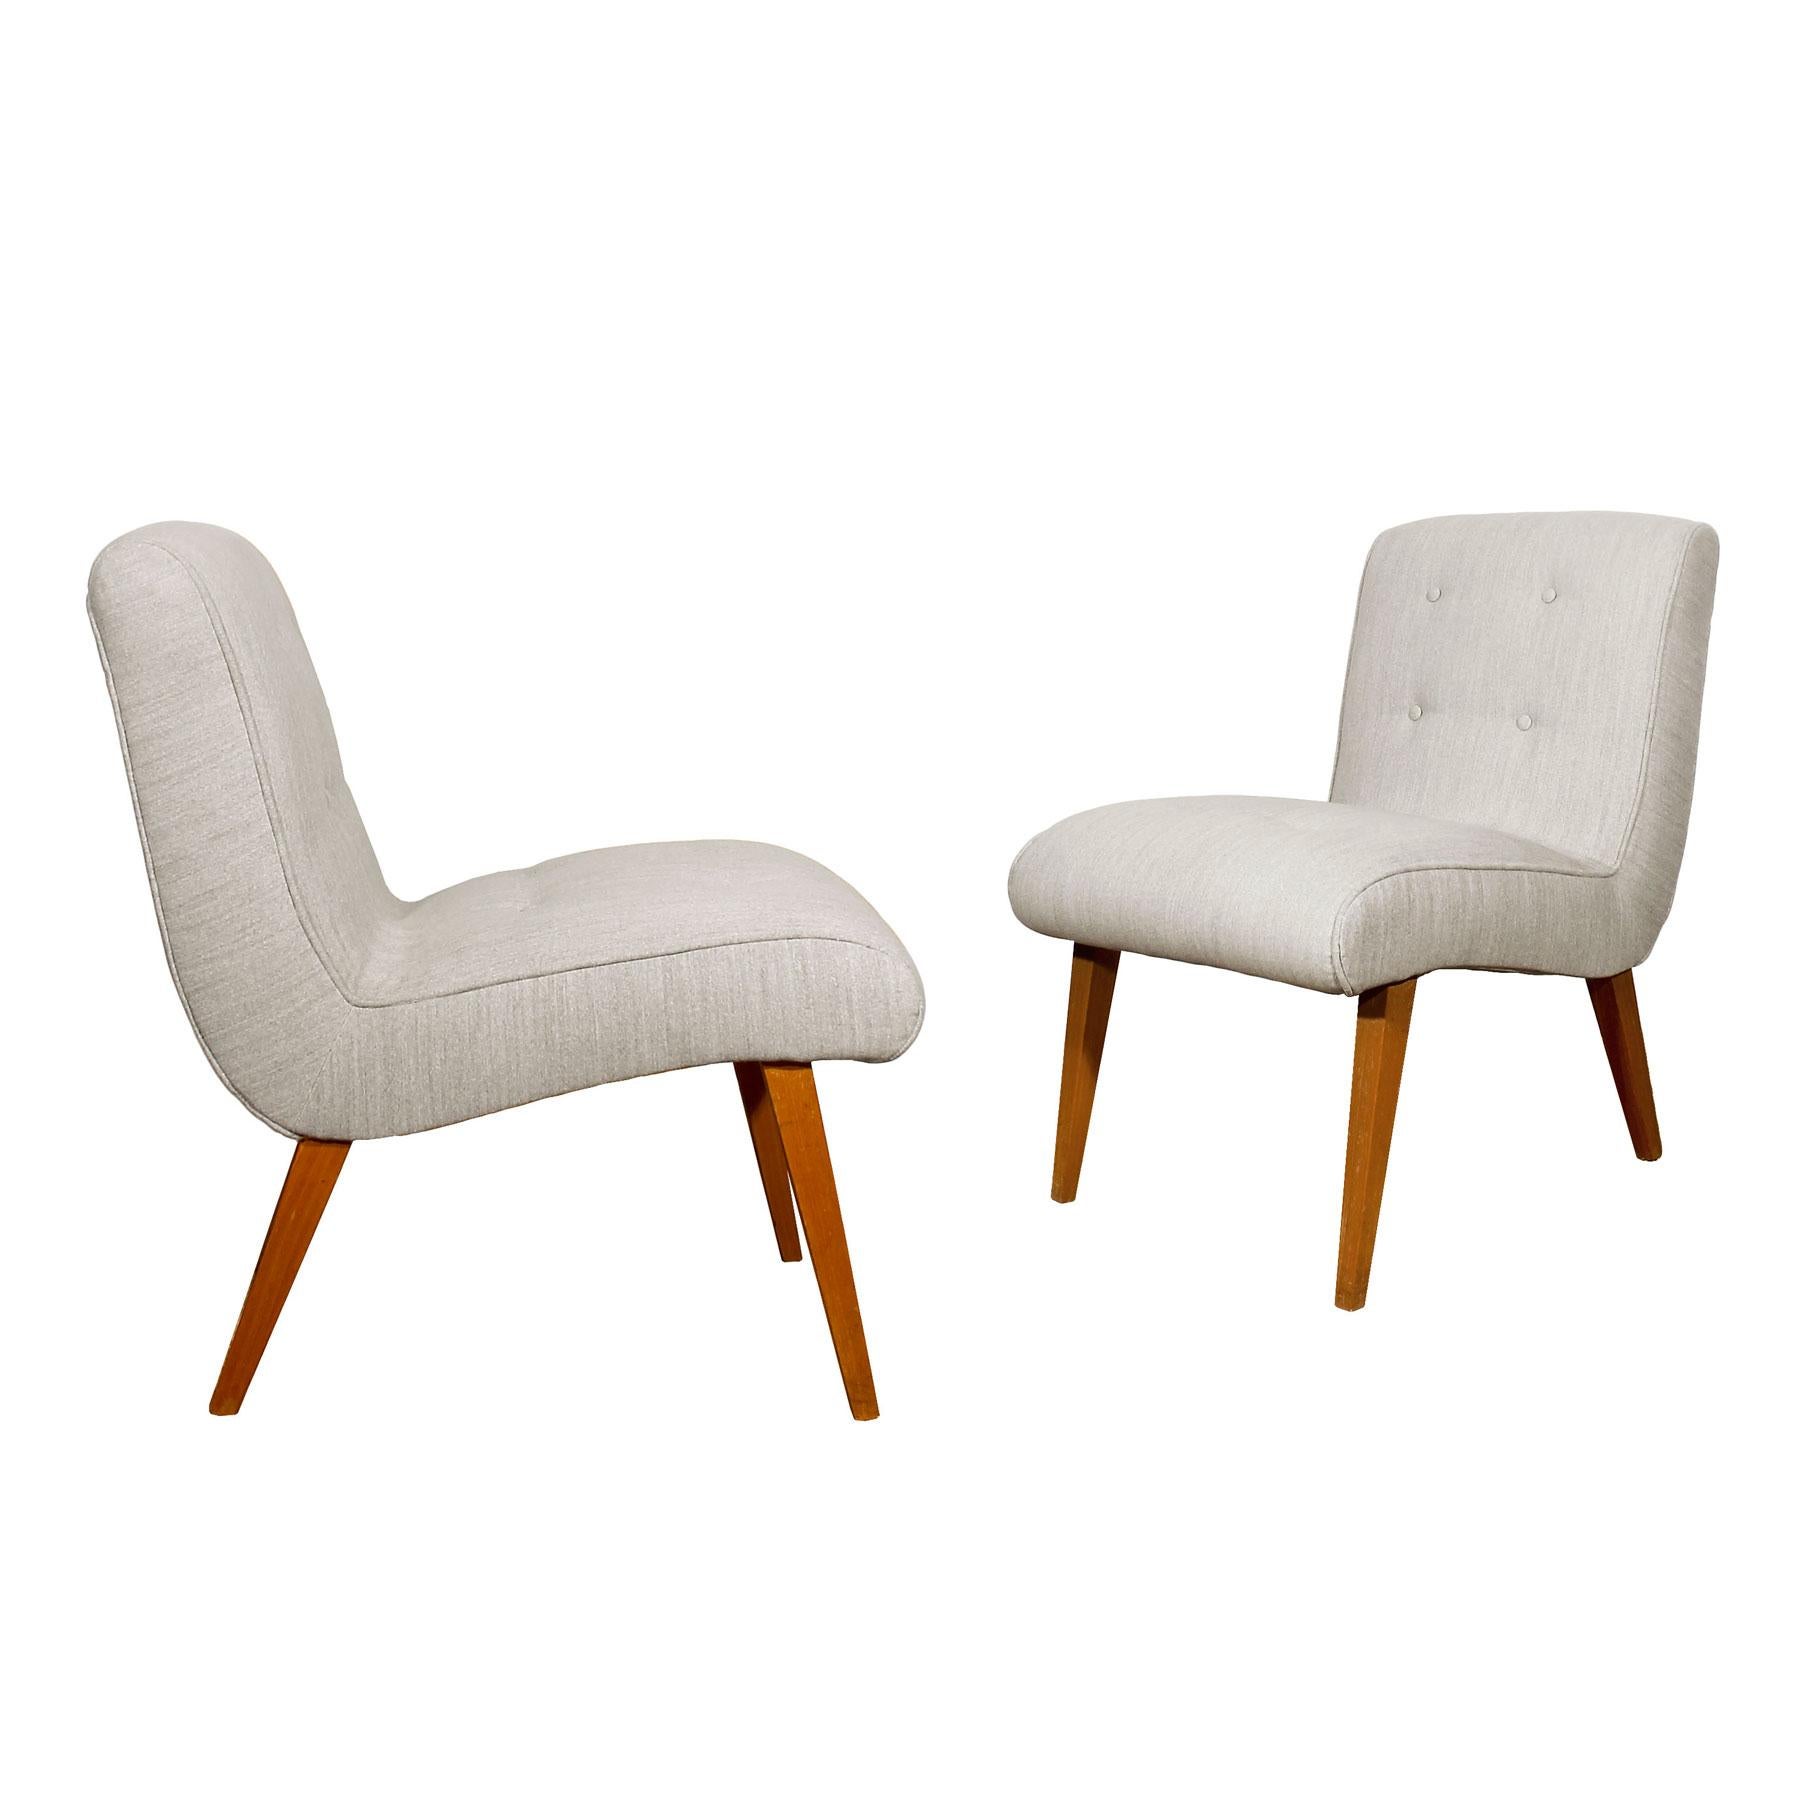 Pair of Vostra low chairs, new upholstery, button padding grey felt, beechwood feet, French polish.

Model: Vostra.

Design: Walter Knoll Team.

Manufacturer: Walter Knoll.

Germany, circa 1950.